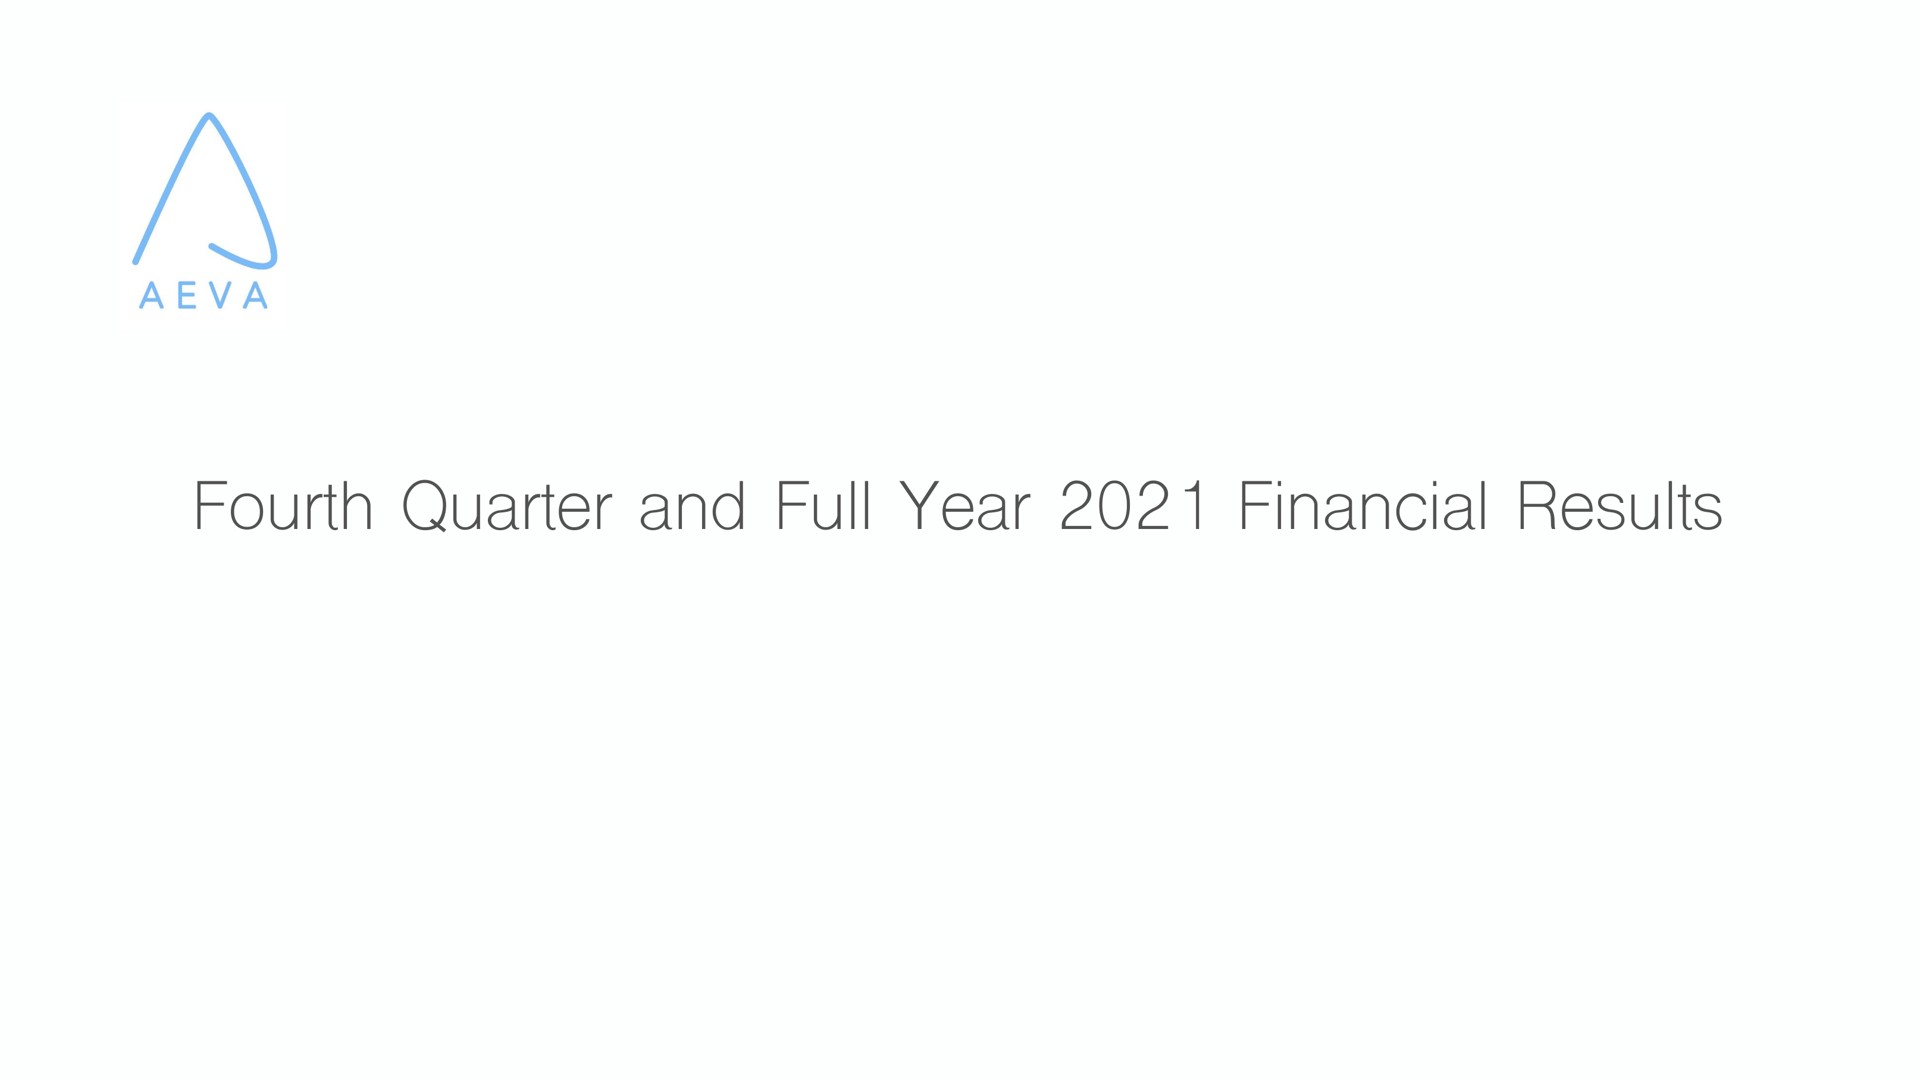 fourth quarter and full year financial results | Aeva